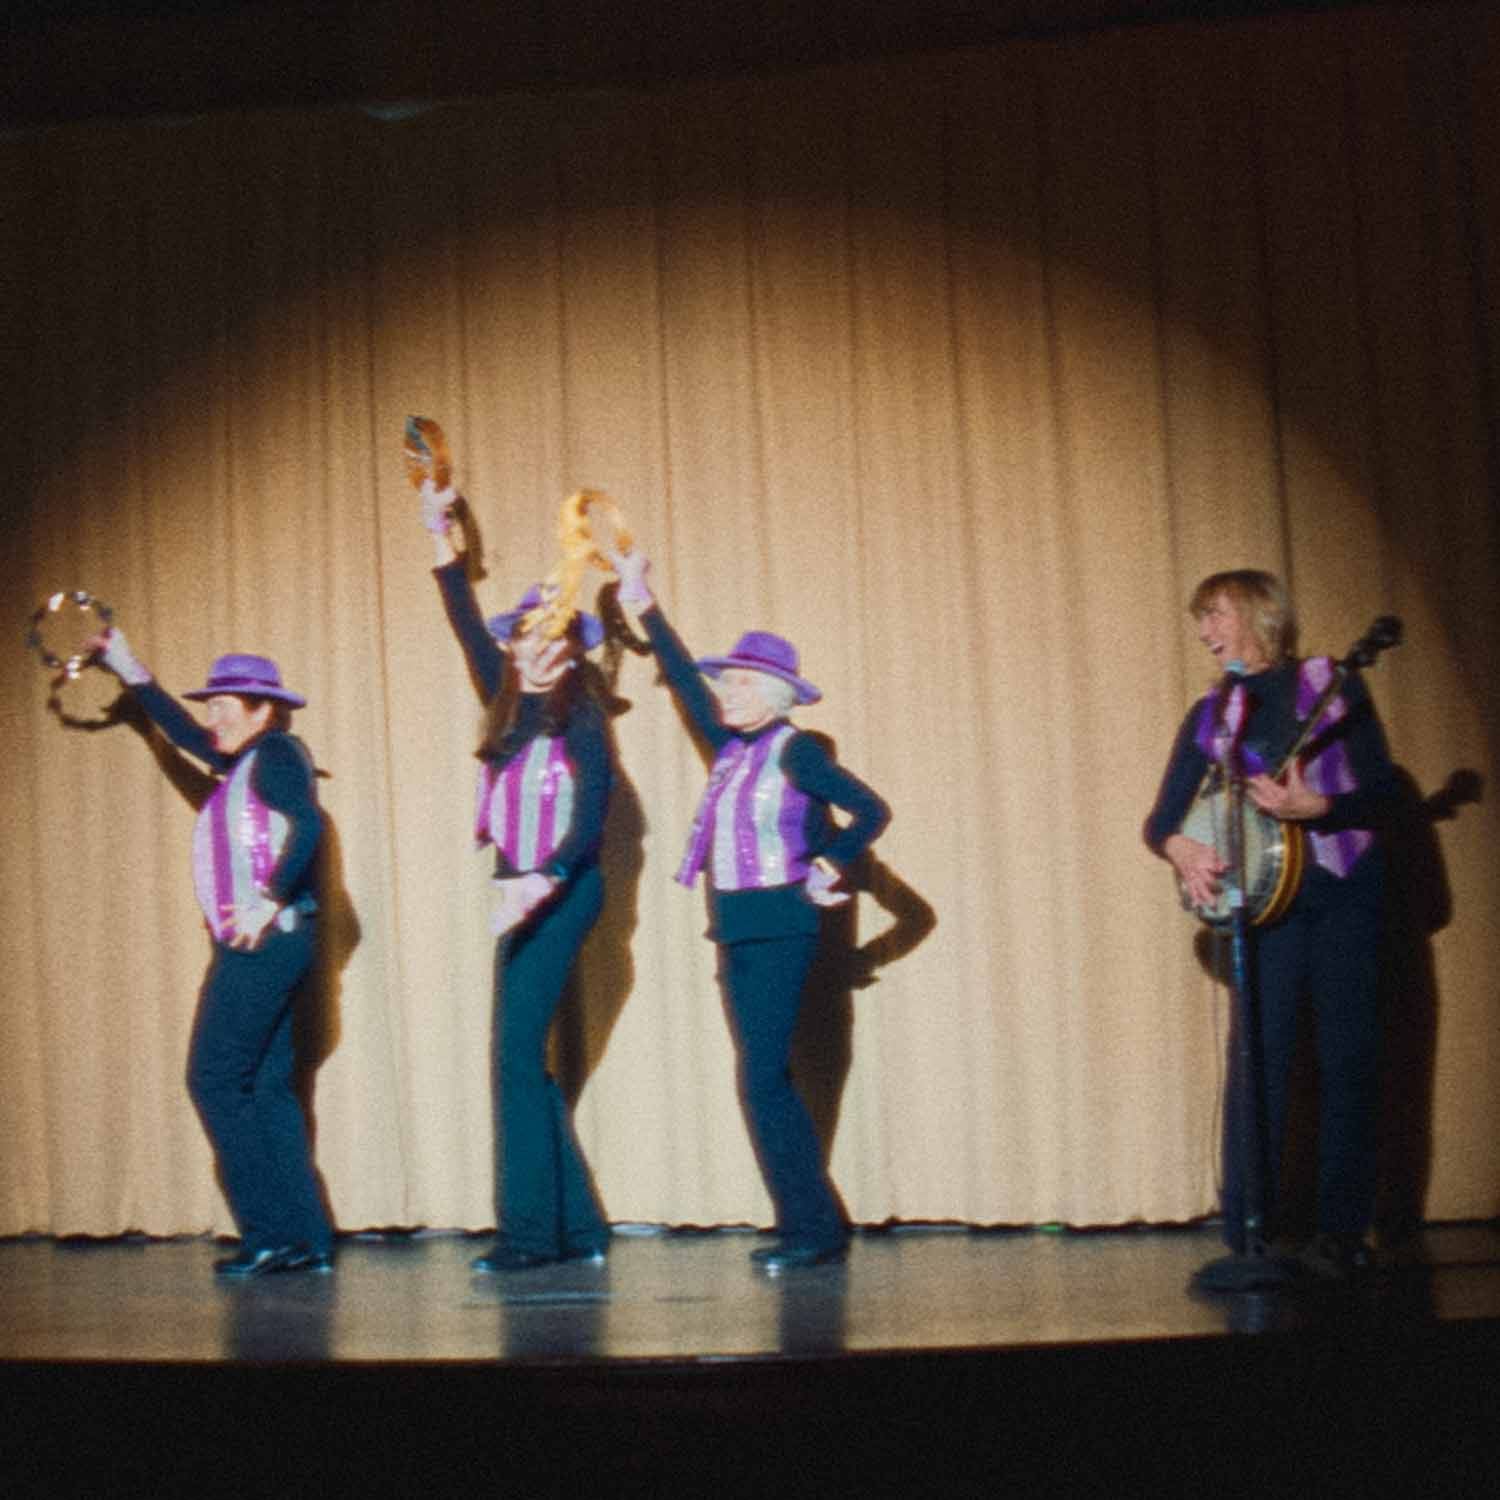 Tap Chicks performing with tambourines and a banjo in purple vests and hats on stage